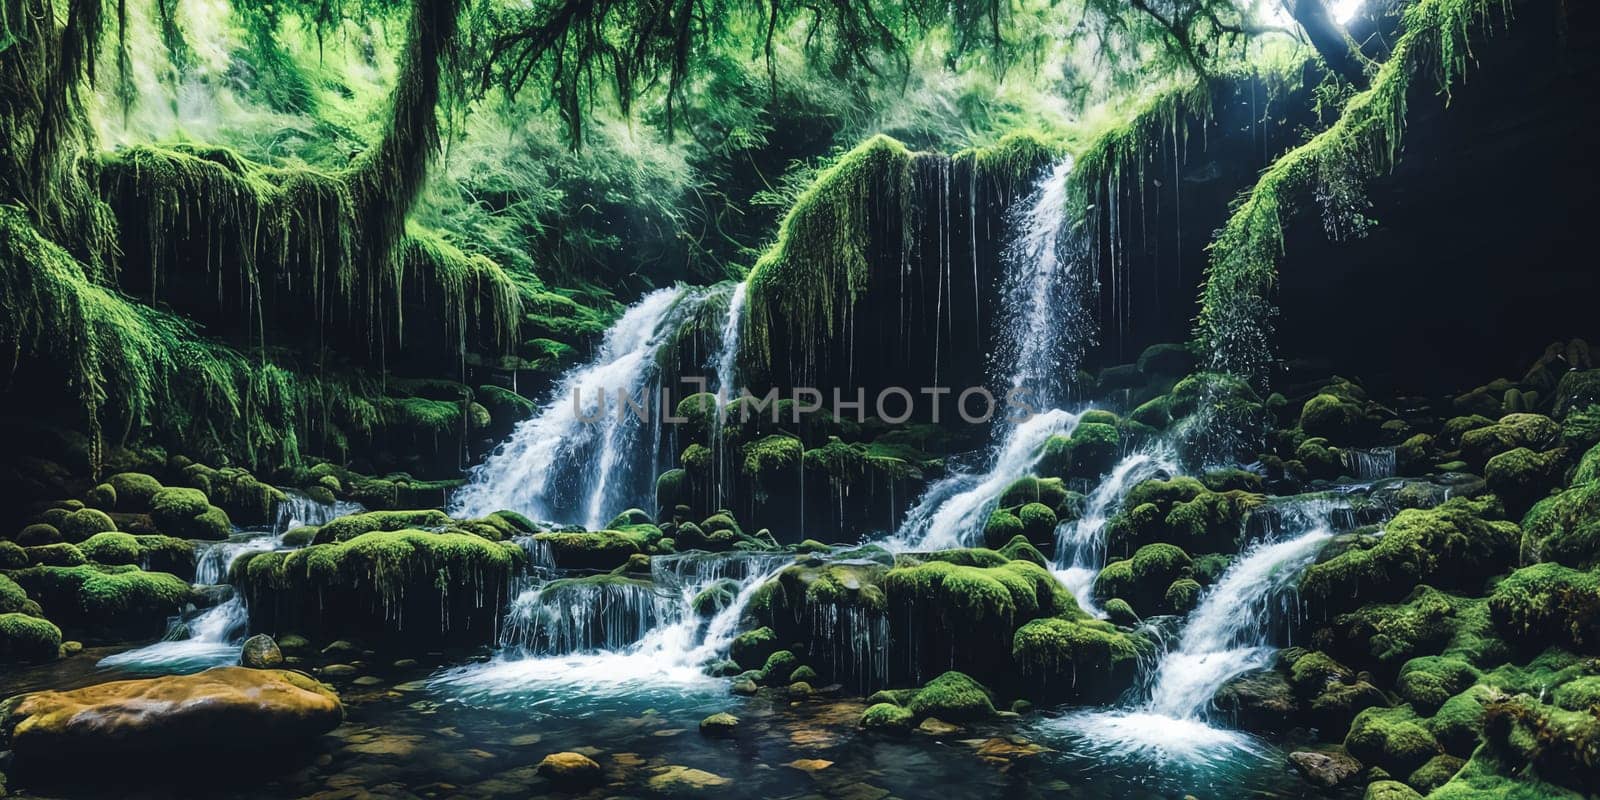 Enchanted Waterfall. A waterfall cascades down moss-covered rocks, revealing a secret grotto behind its veil. Crystal-clear water sparkles with hints of magic, and colorful flowers bloom along the banks.